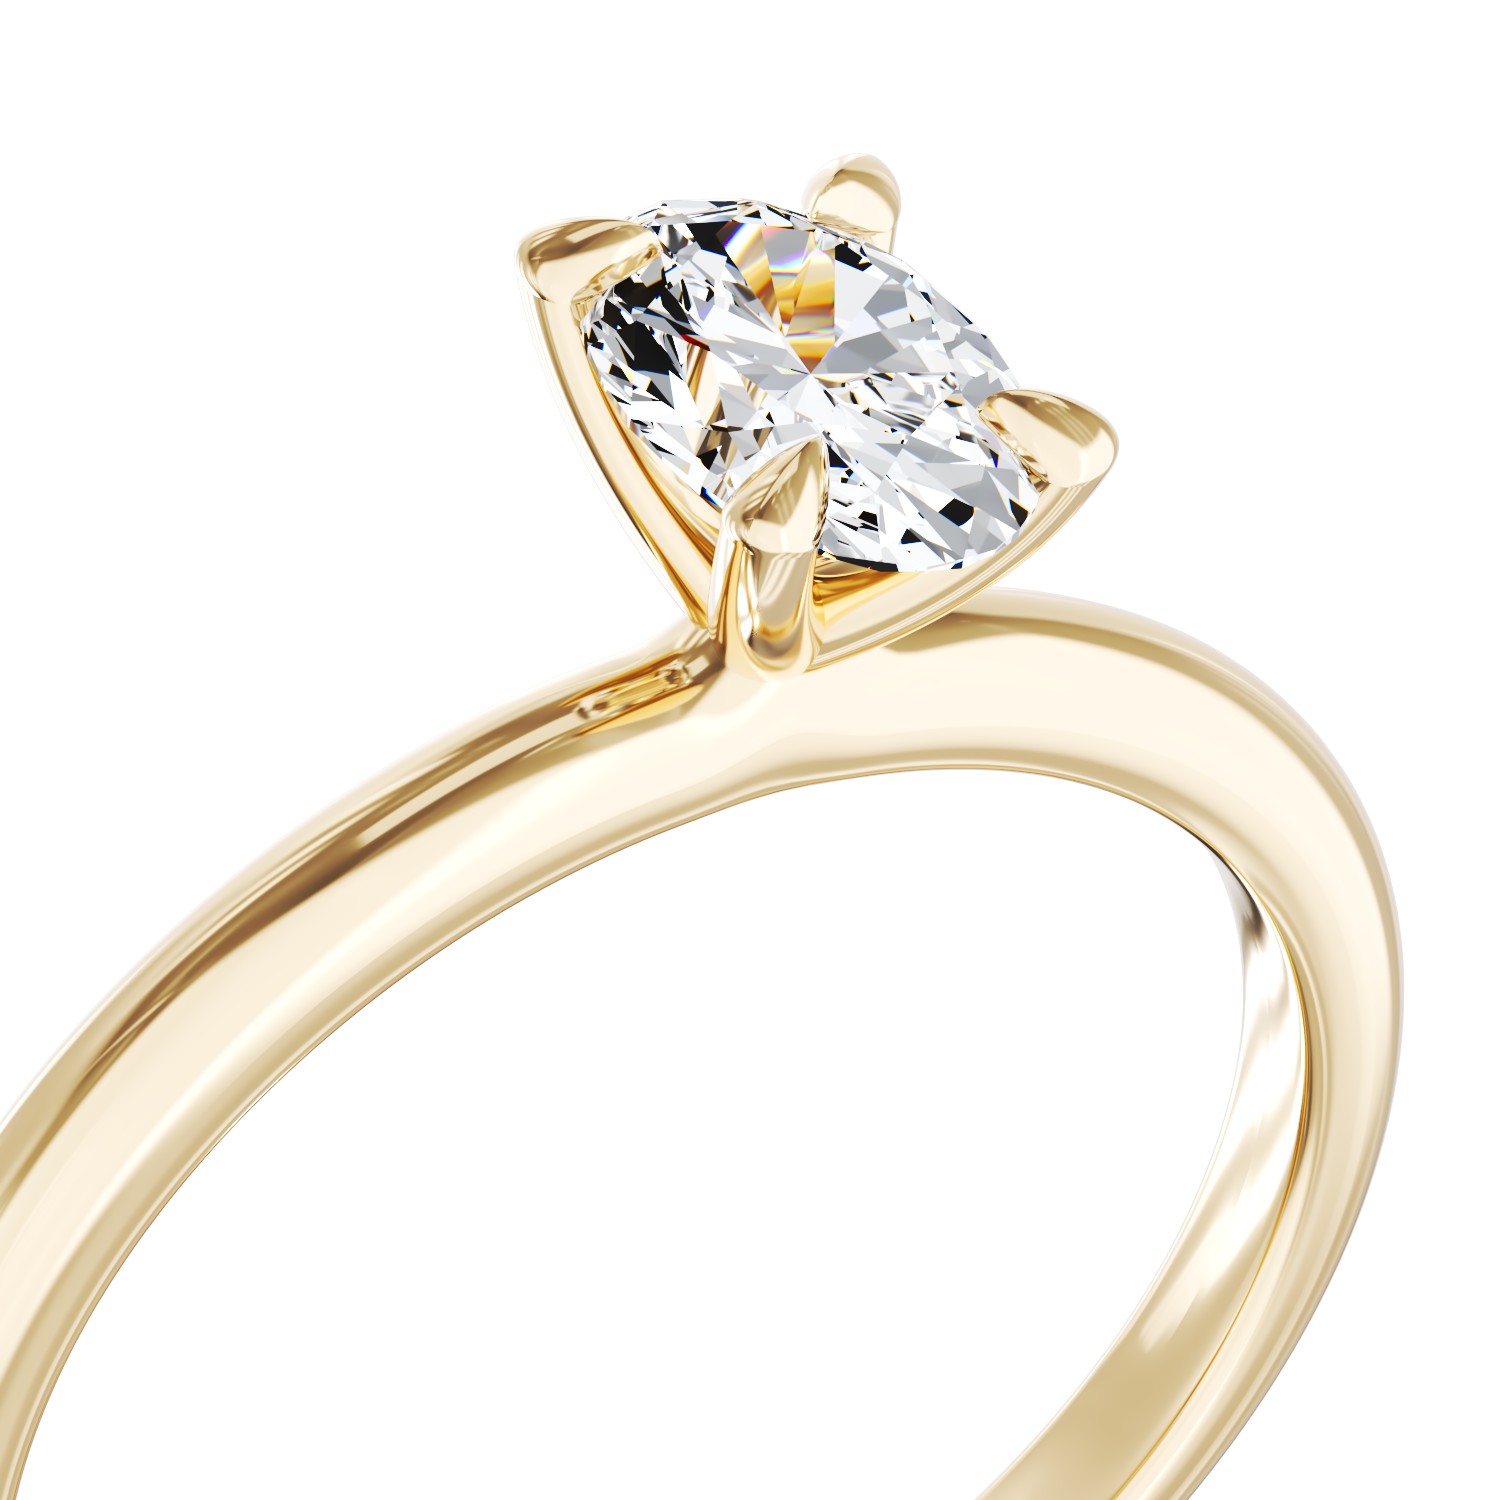 18K yellow gold engagement ring with diamond of 0.3ct